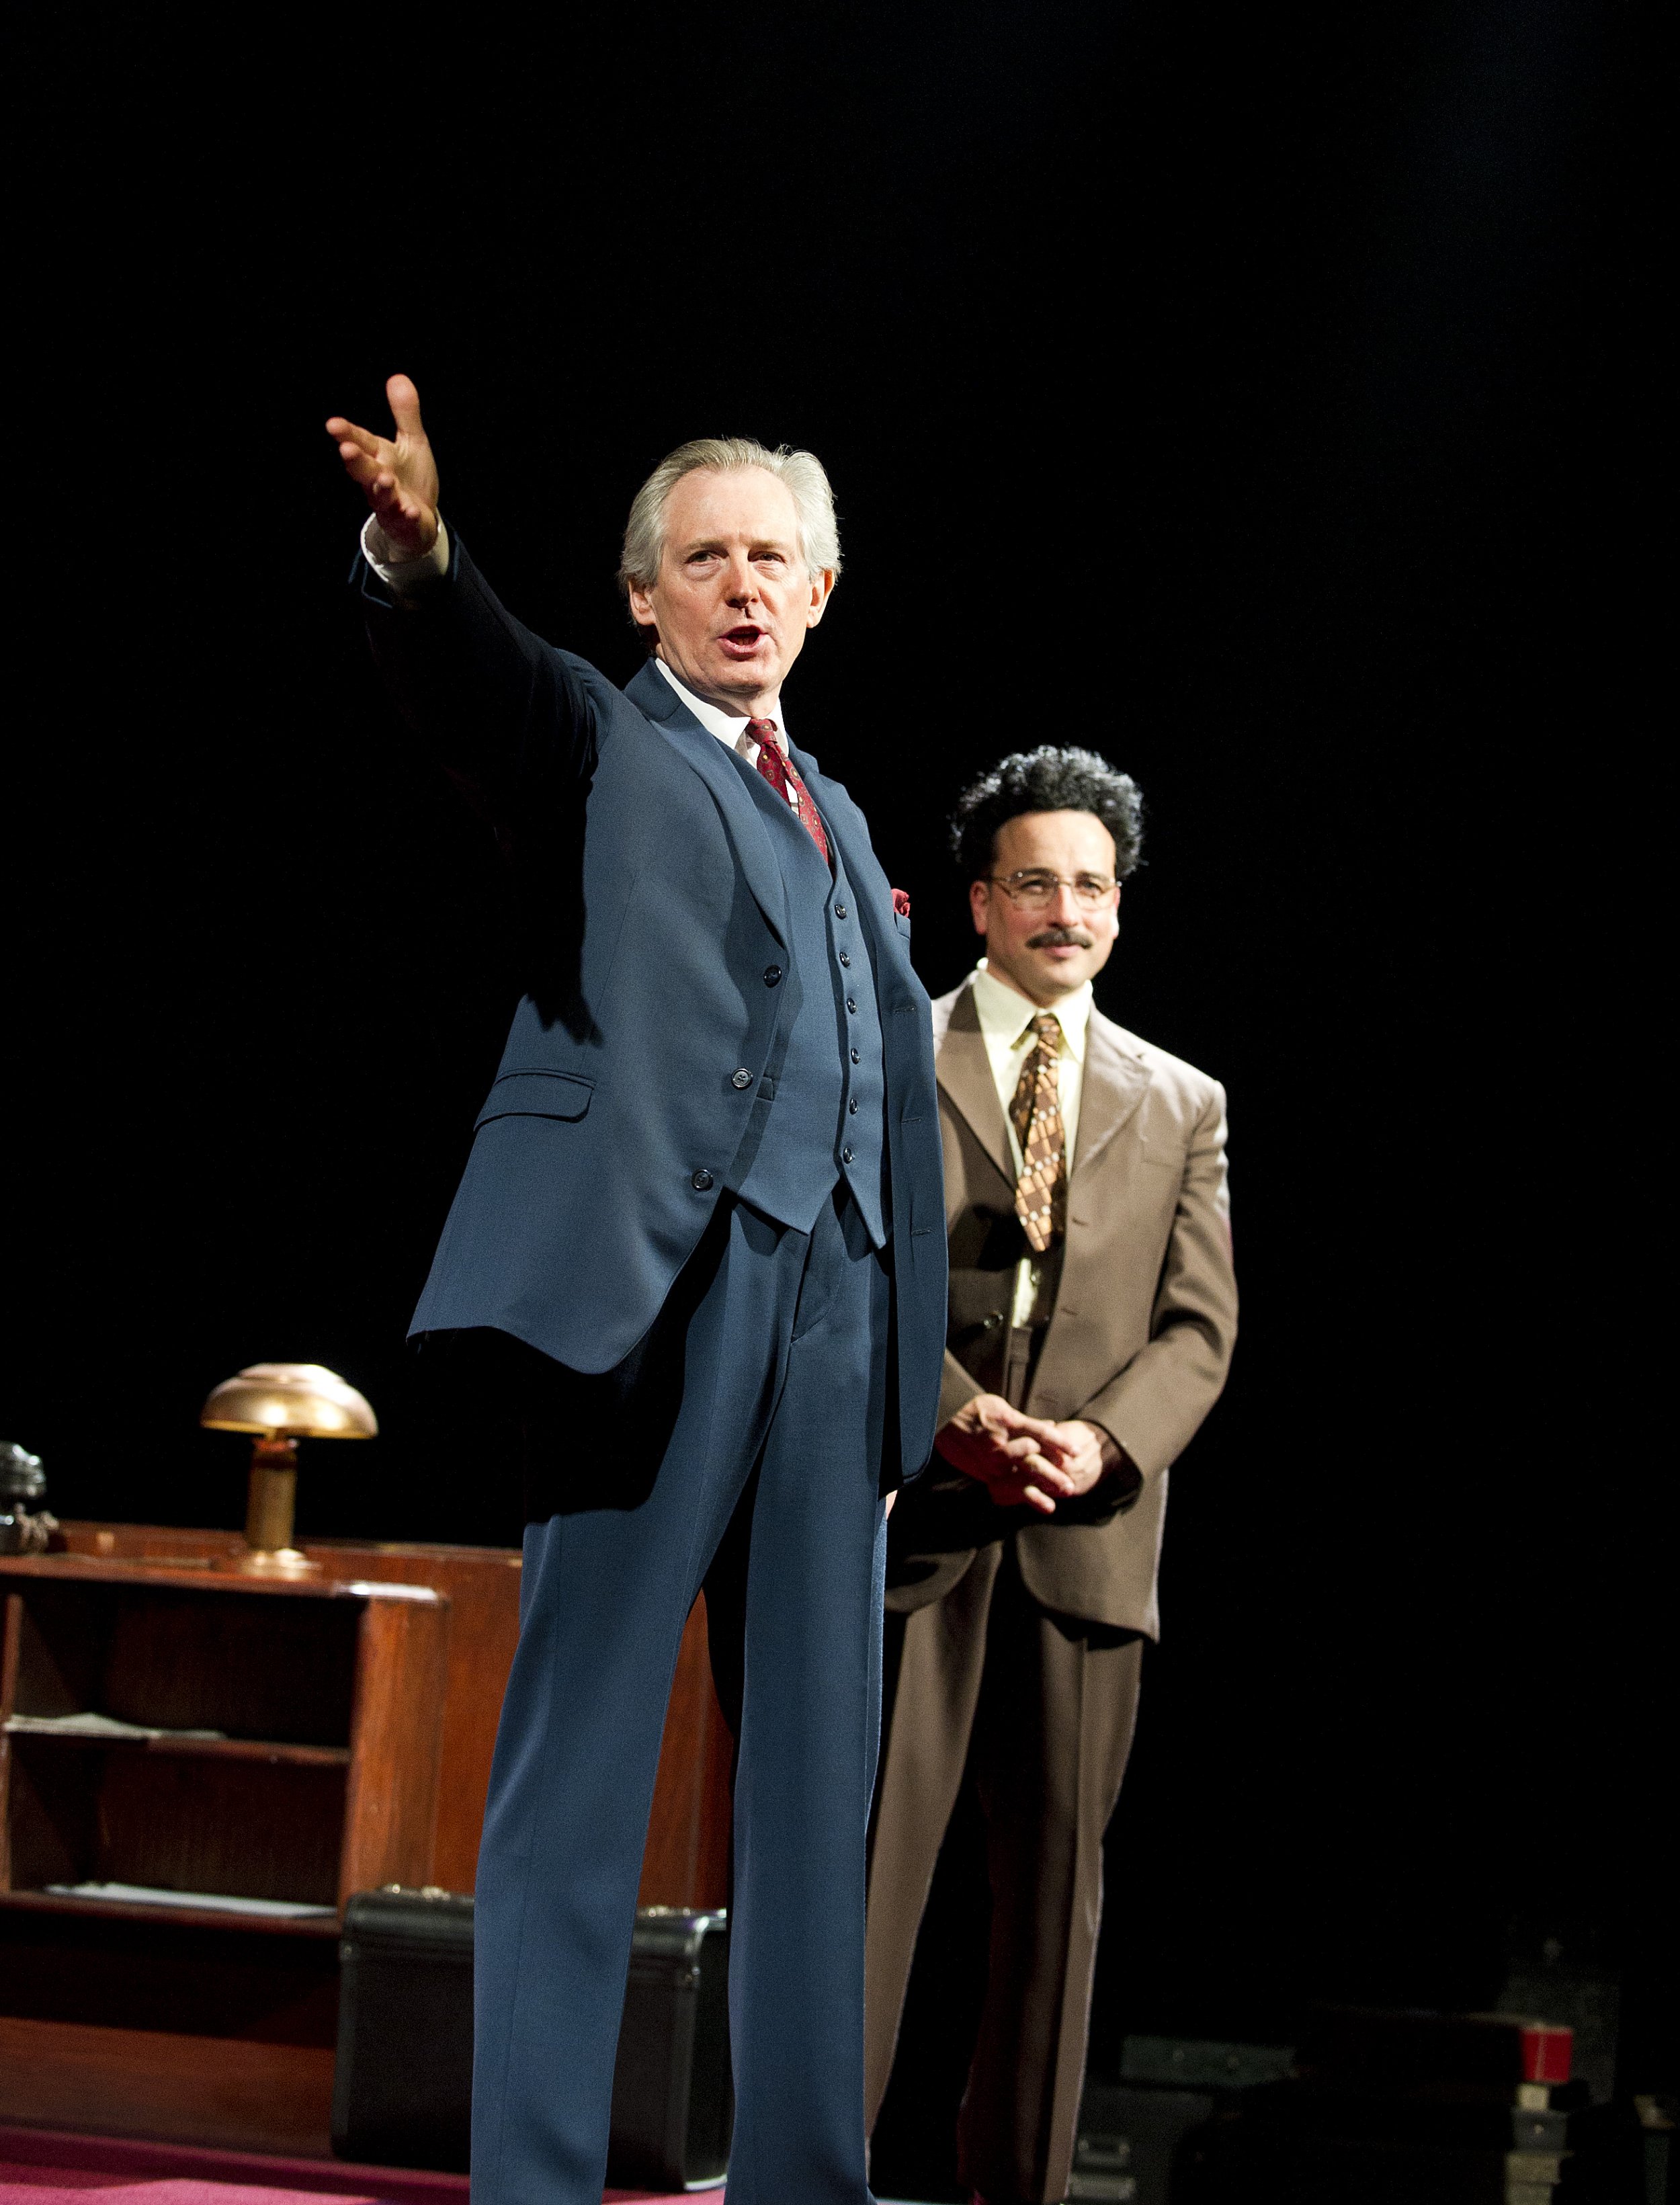 Patrick Drury as Willy Brandt, Aiden McArdle as Gunter Guillaume